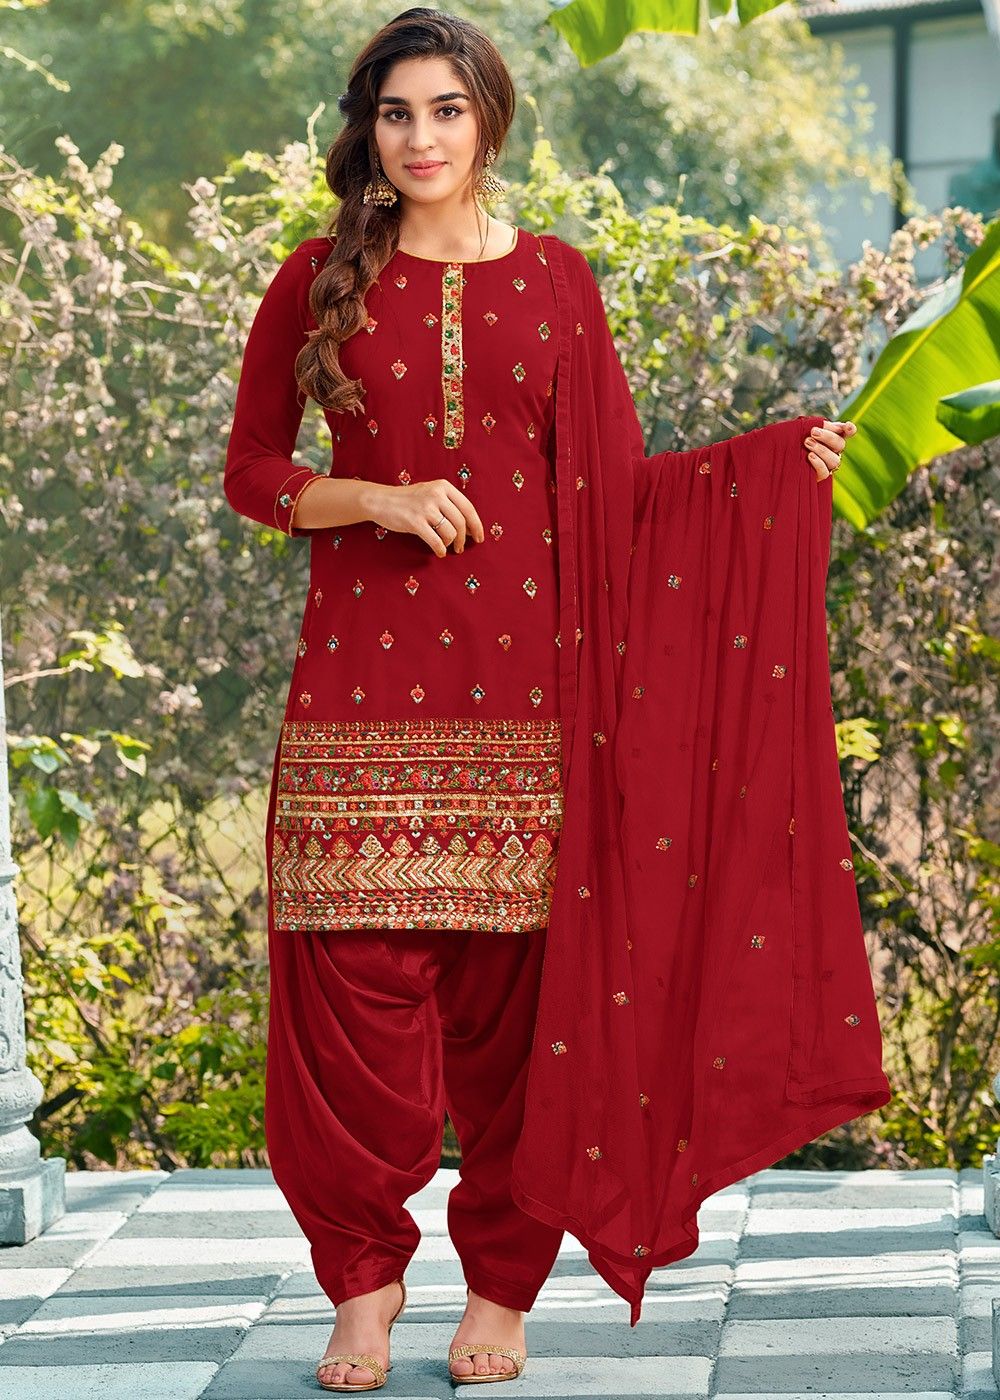 Wedding Dress Cherry Red Patiala Suit with Mirror Work LSTV118778